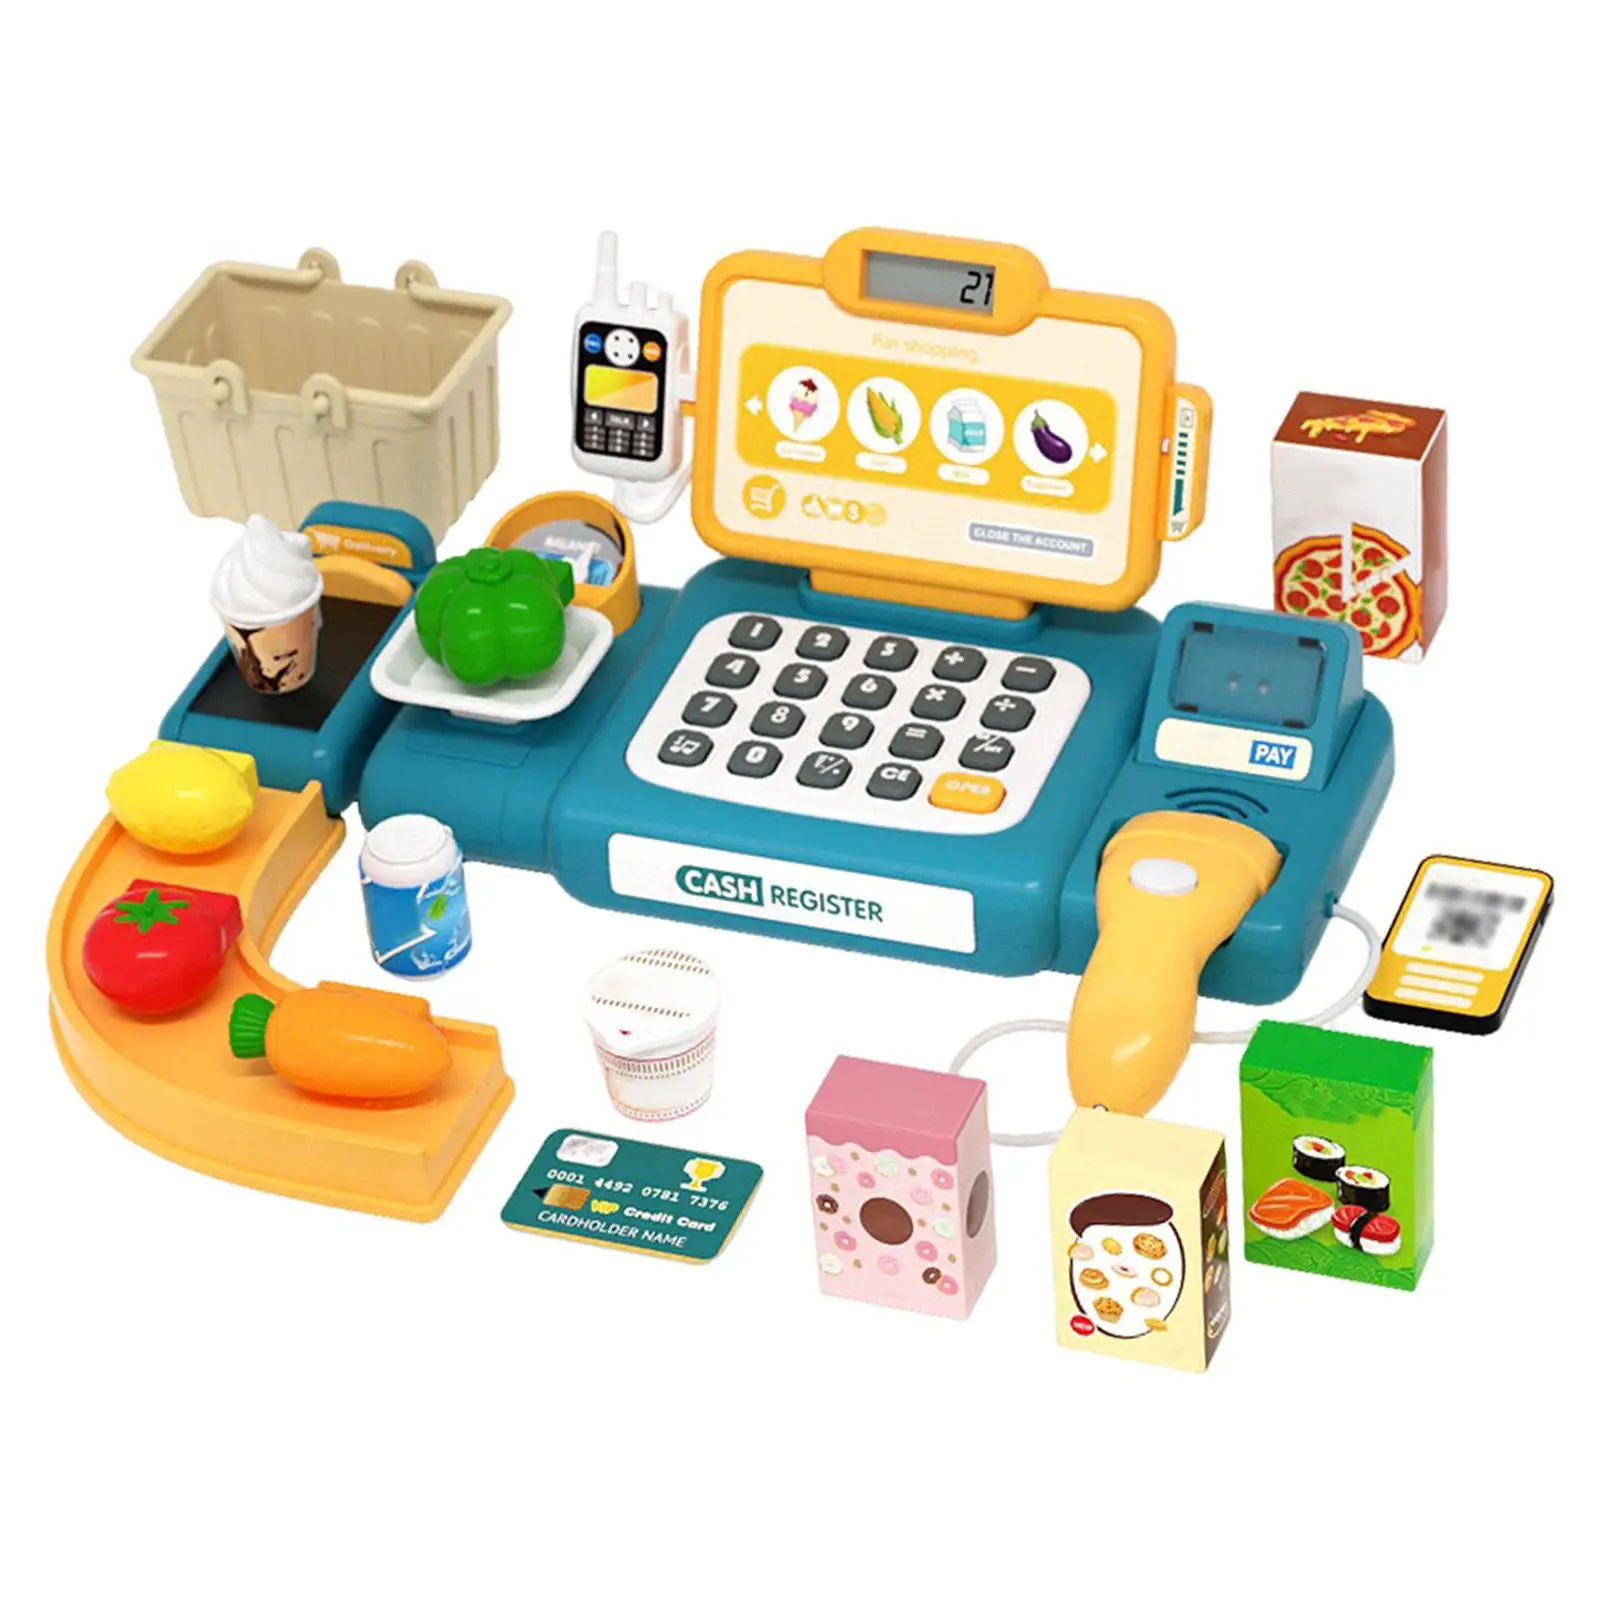 Supermarket Cashier Toy Realistic Educational Grocery Supermarket Playset for Role Play Activity Interaction Play Store